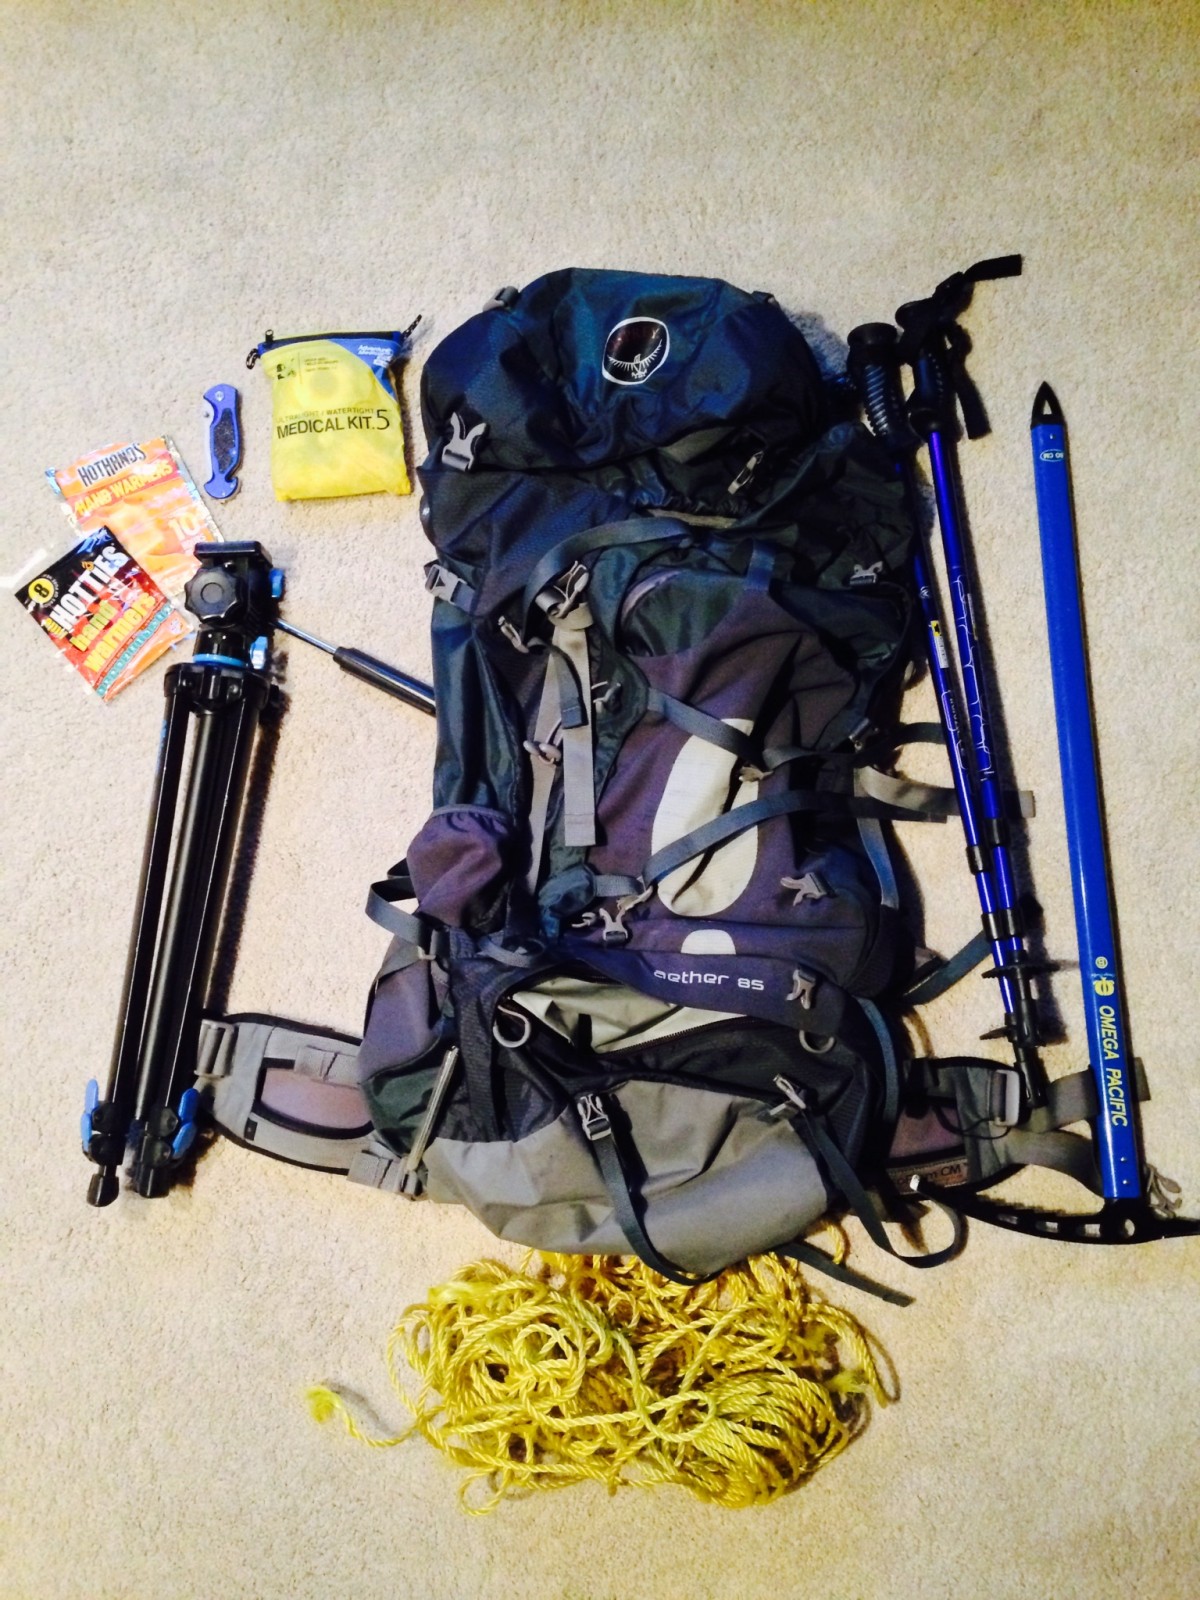 Osprey Aether 85L backpack, camera tri-pod, Omega Pacific 80cm ice axe, Mountainsmith trekking poles, paracord, med-kit, knife, hand warmers